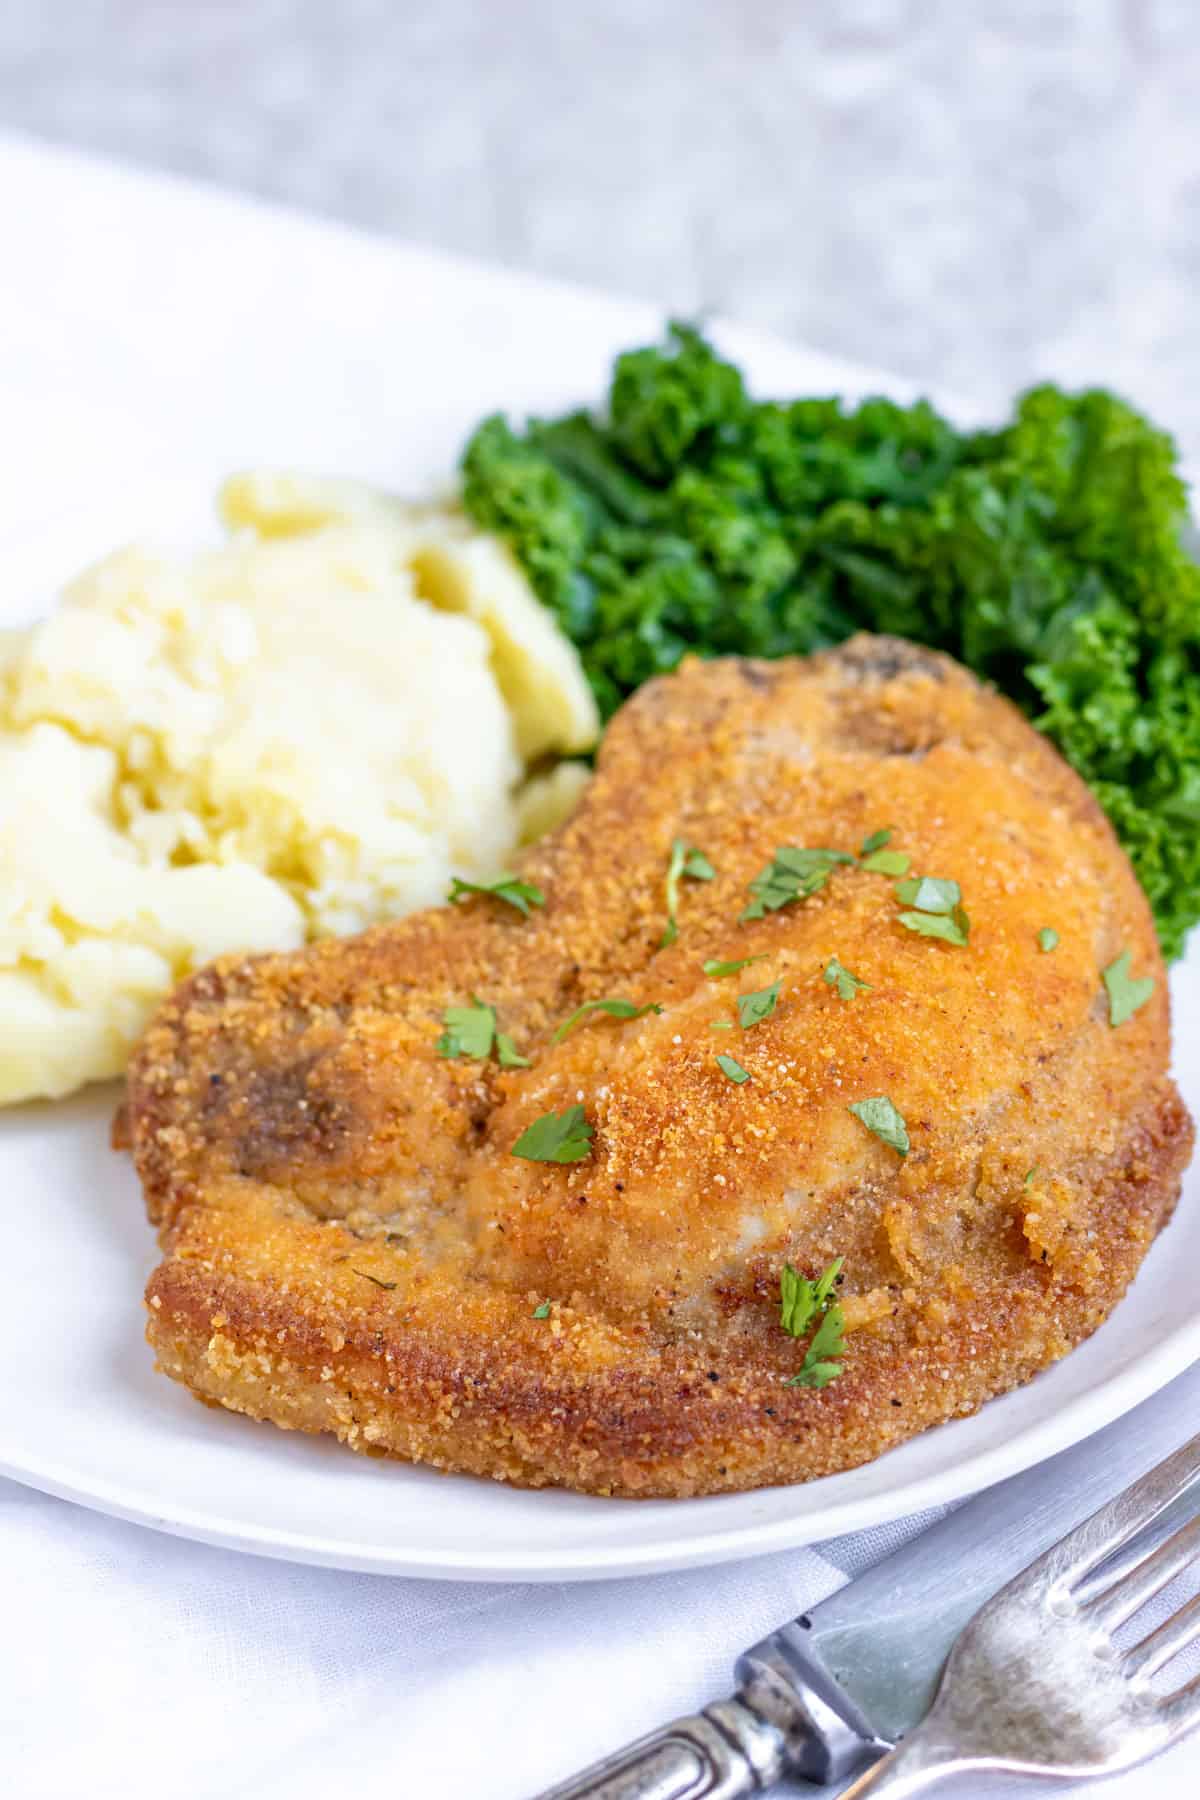 Plate with a breaded pork chop, mashed potato and greens.